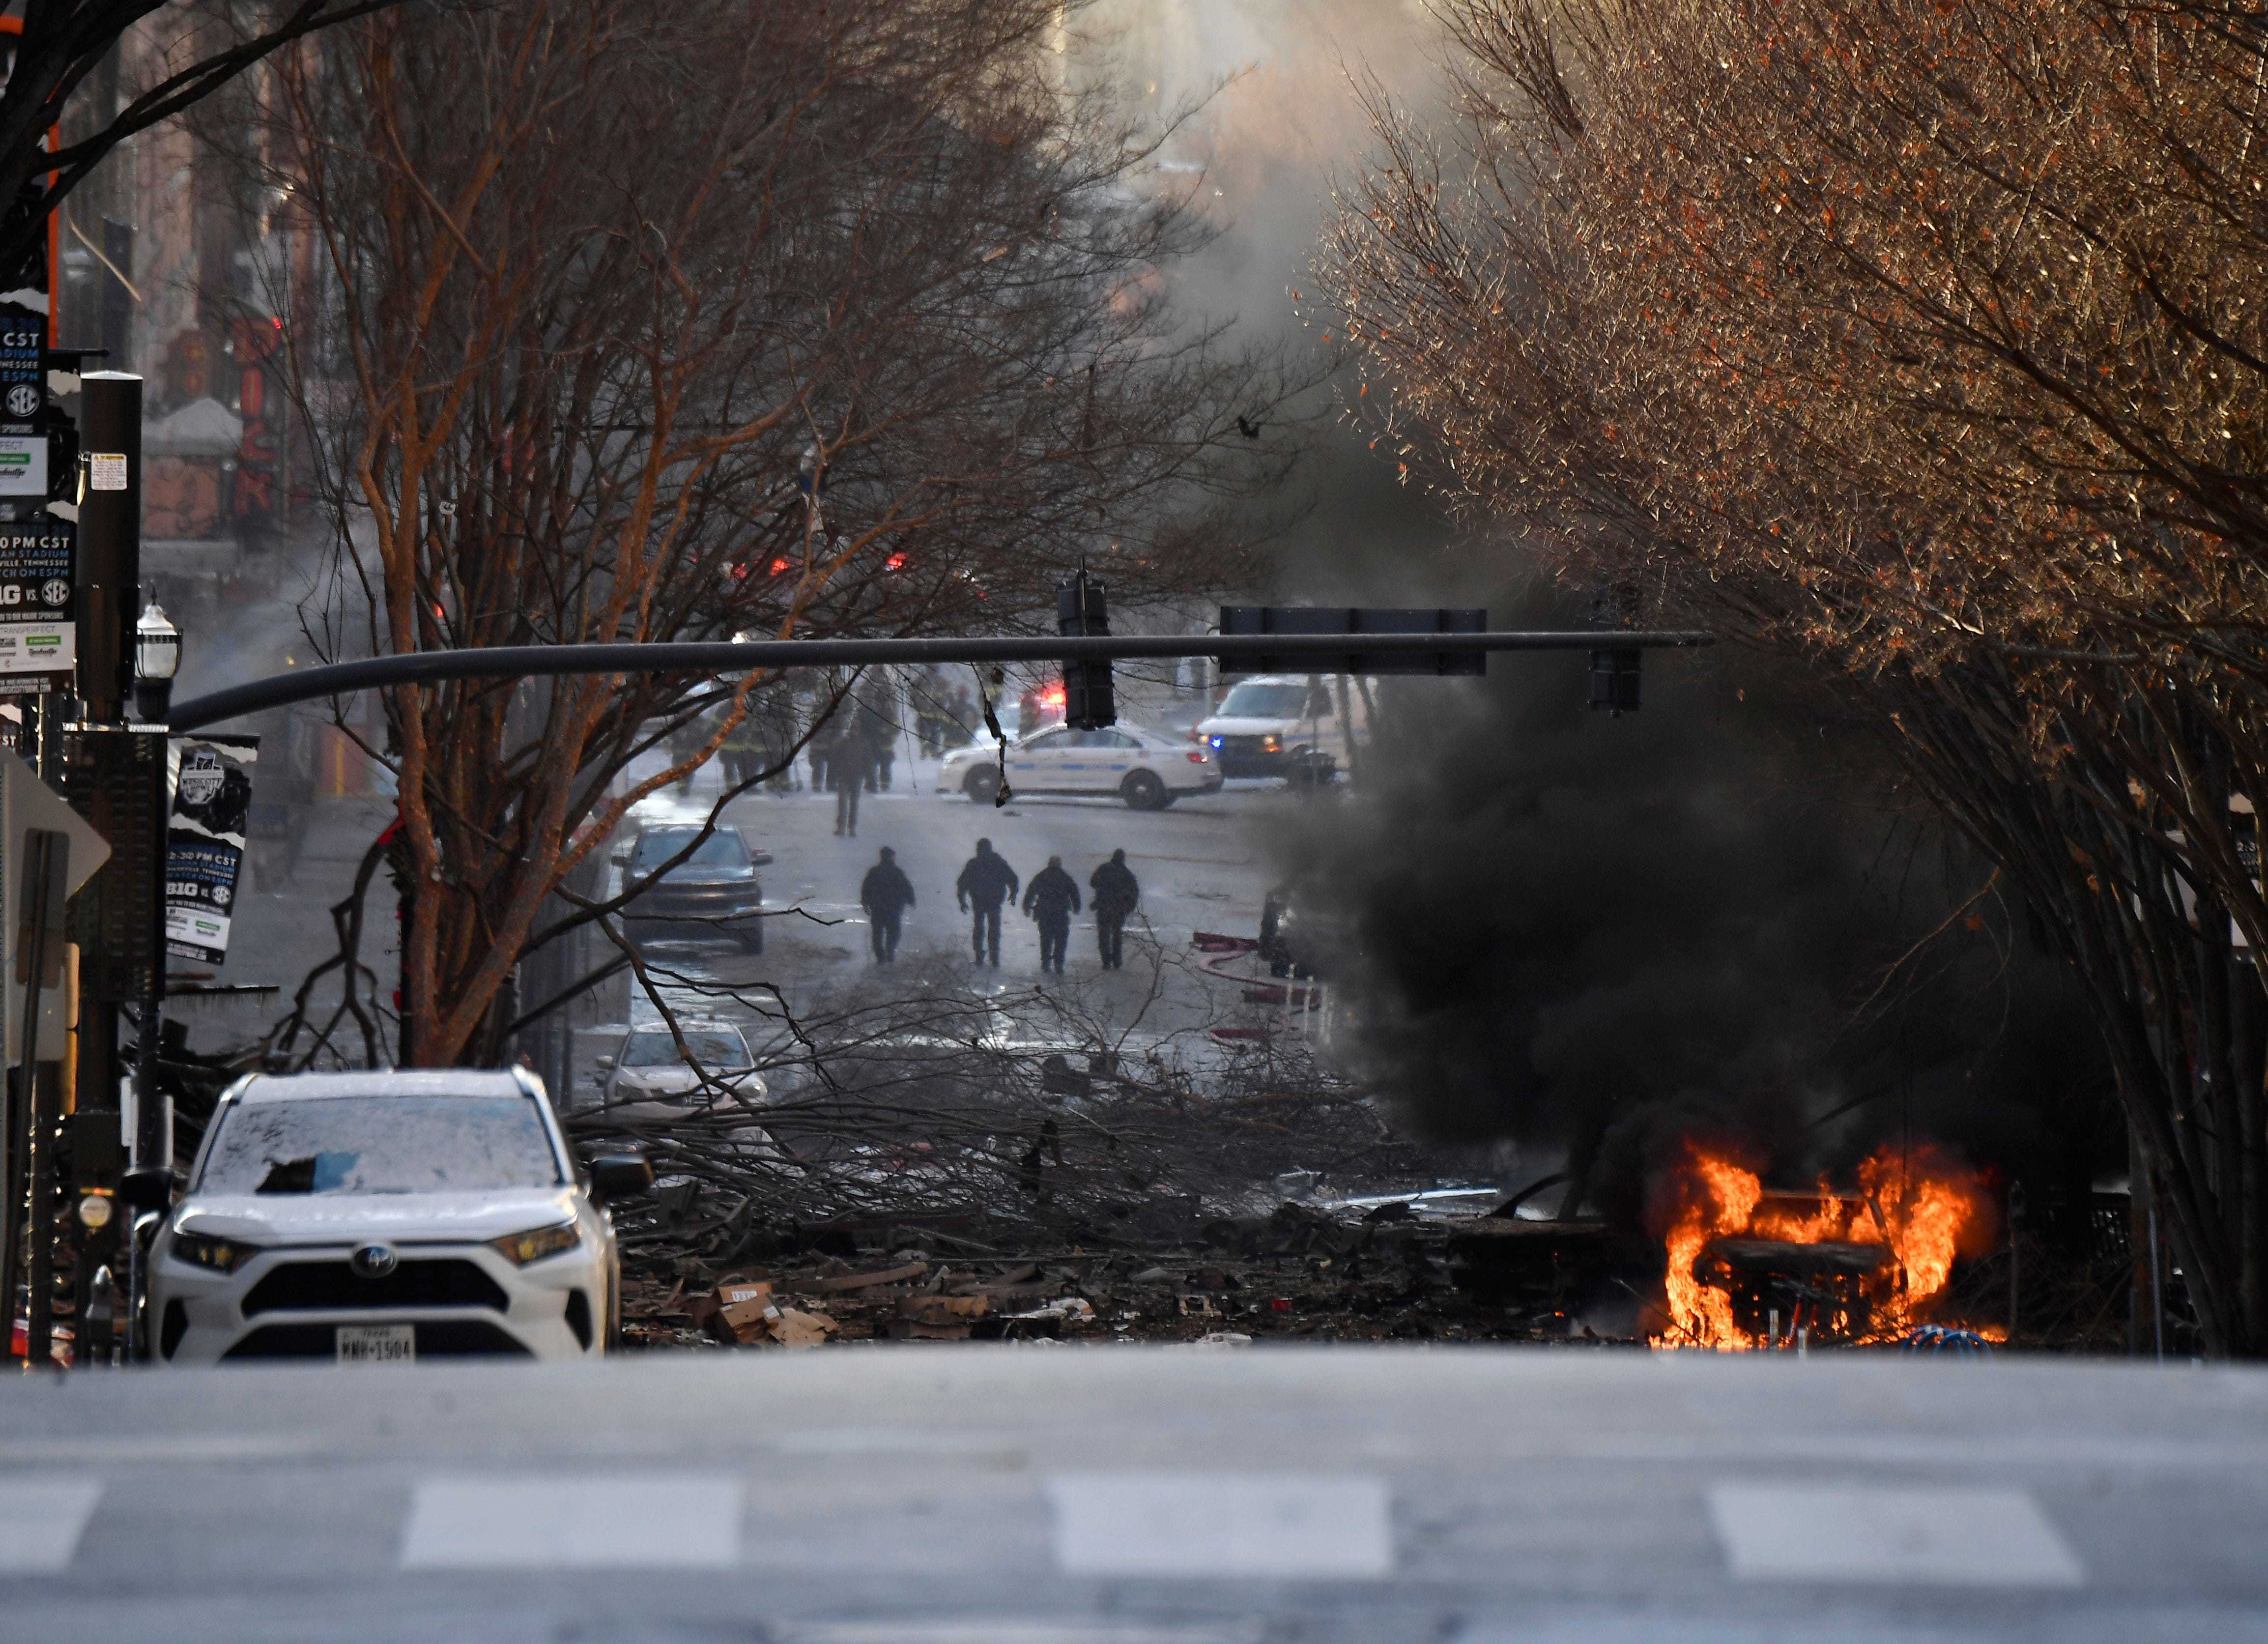 Dec 25, 2020; Nashville, TN, USA; A vehicle is on fire after an explosion in the area of Second and Commerce Friday, Dec. 25, 2020 in Nashville, Tenn. Mandatory Credit: Andrew Nelles-USA TODAY NETWORK/Sipa USA